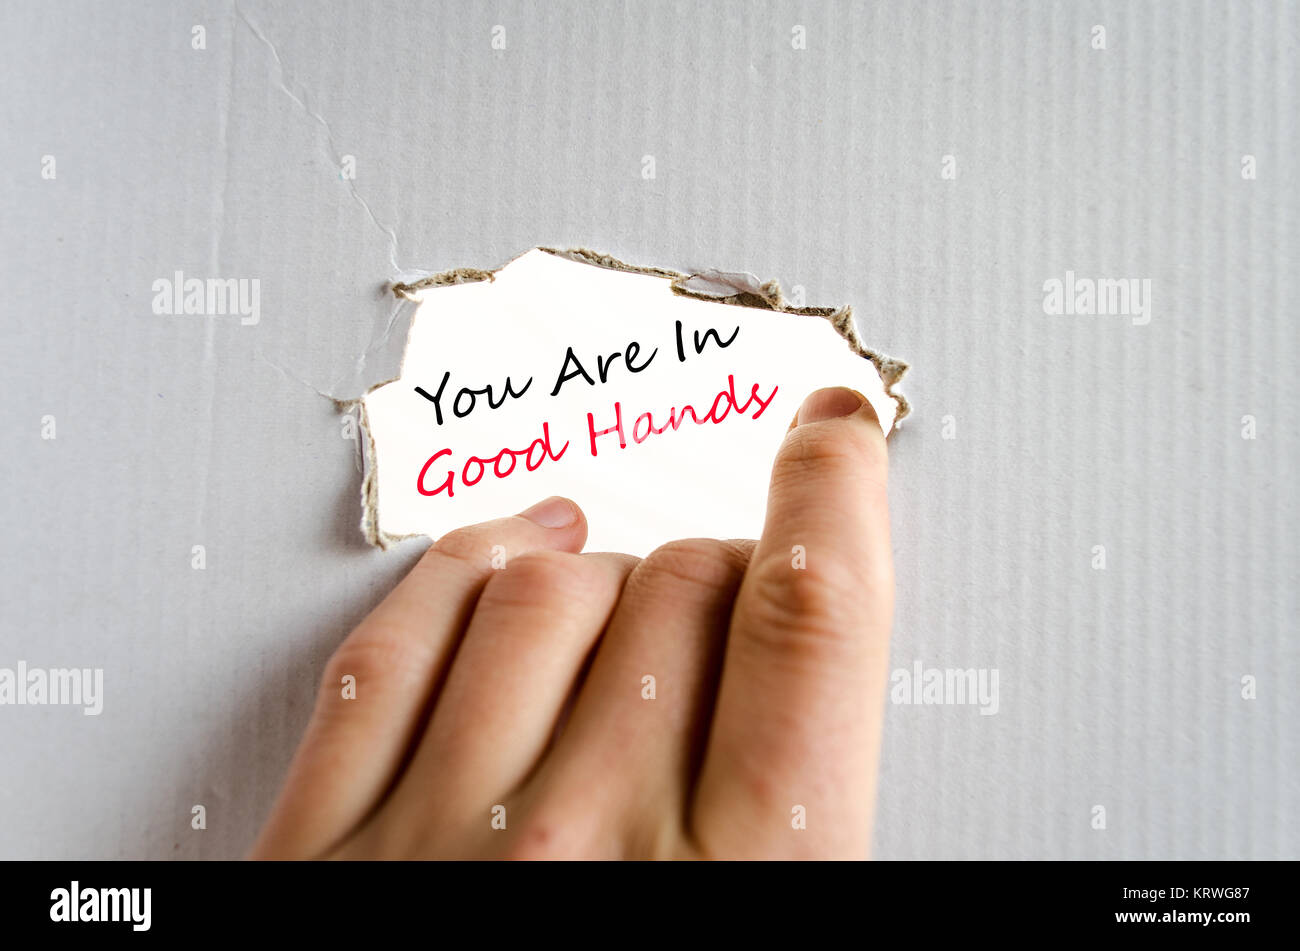 You are in good hands text concept Stock Photo